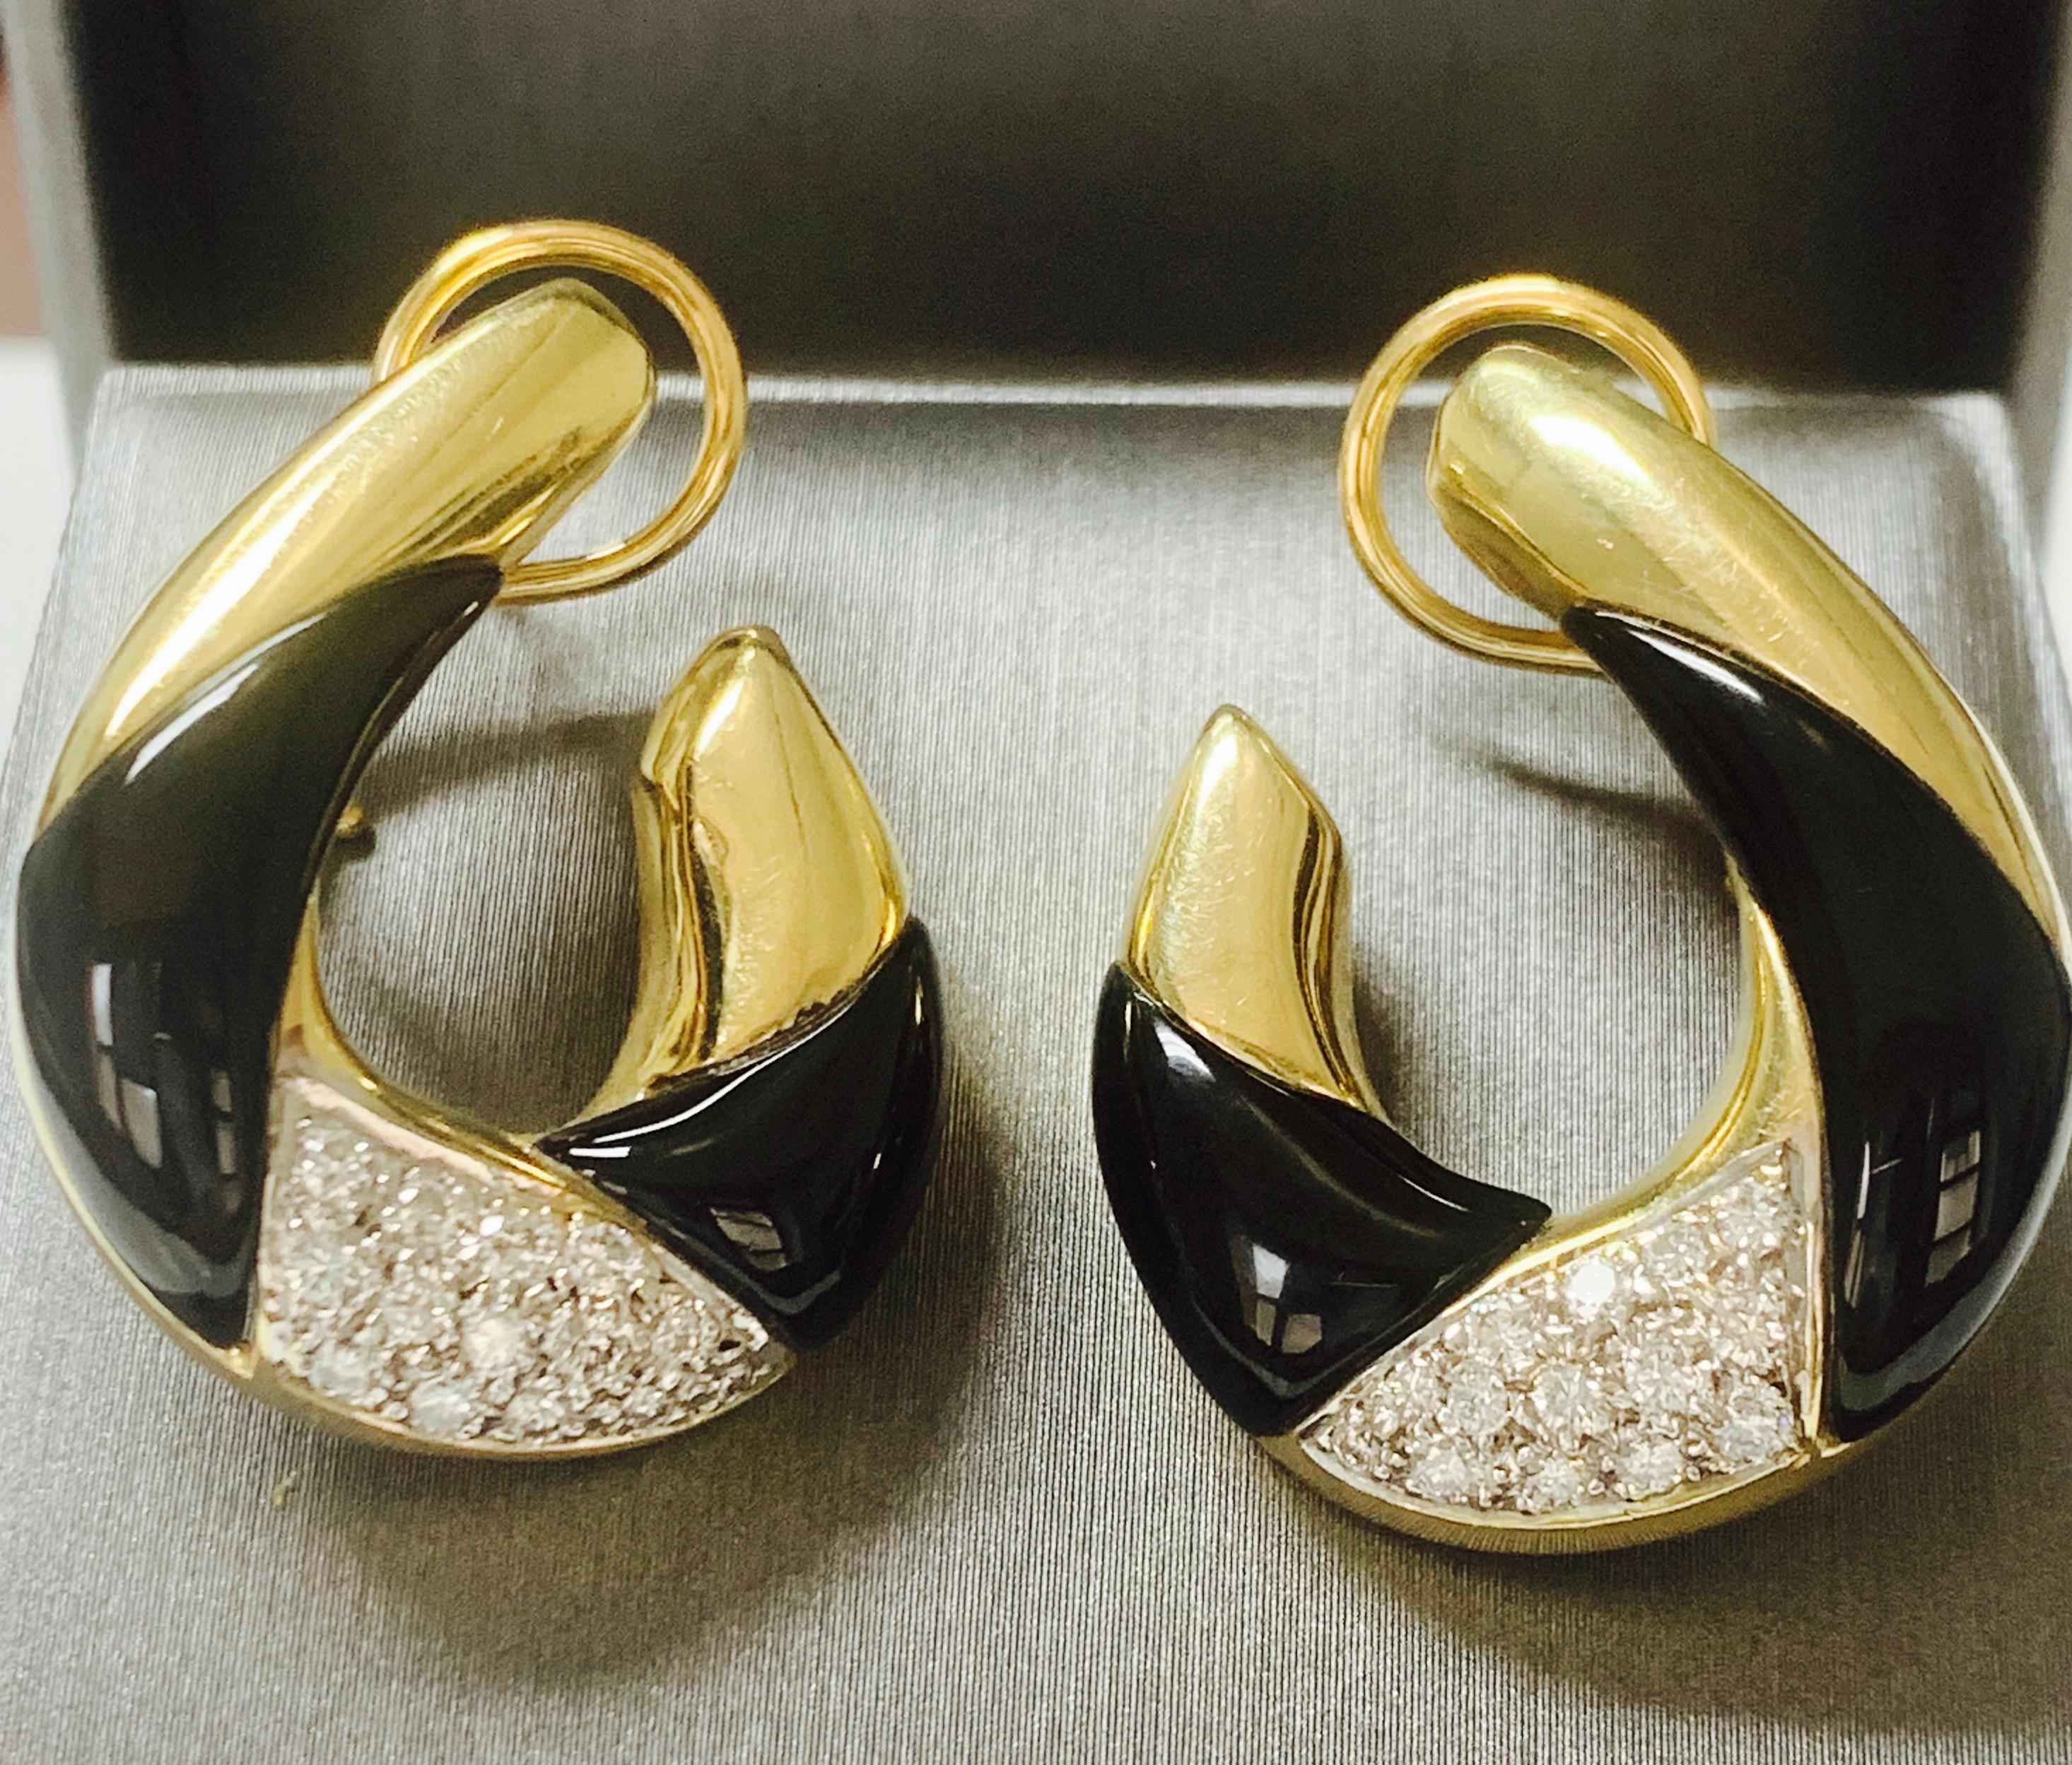 Beautiful diamond and black onyx earrings are hand crafted in 14 k yellow gold. 
The details are as follows : 

Diamond weight : 0.85 carat 
Metal : 14 k yellow gold 
Measurements : 1 1/4 inch by 1 inch 

